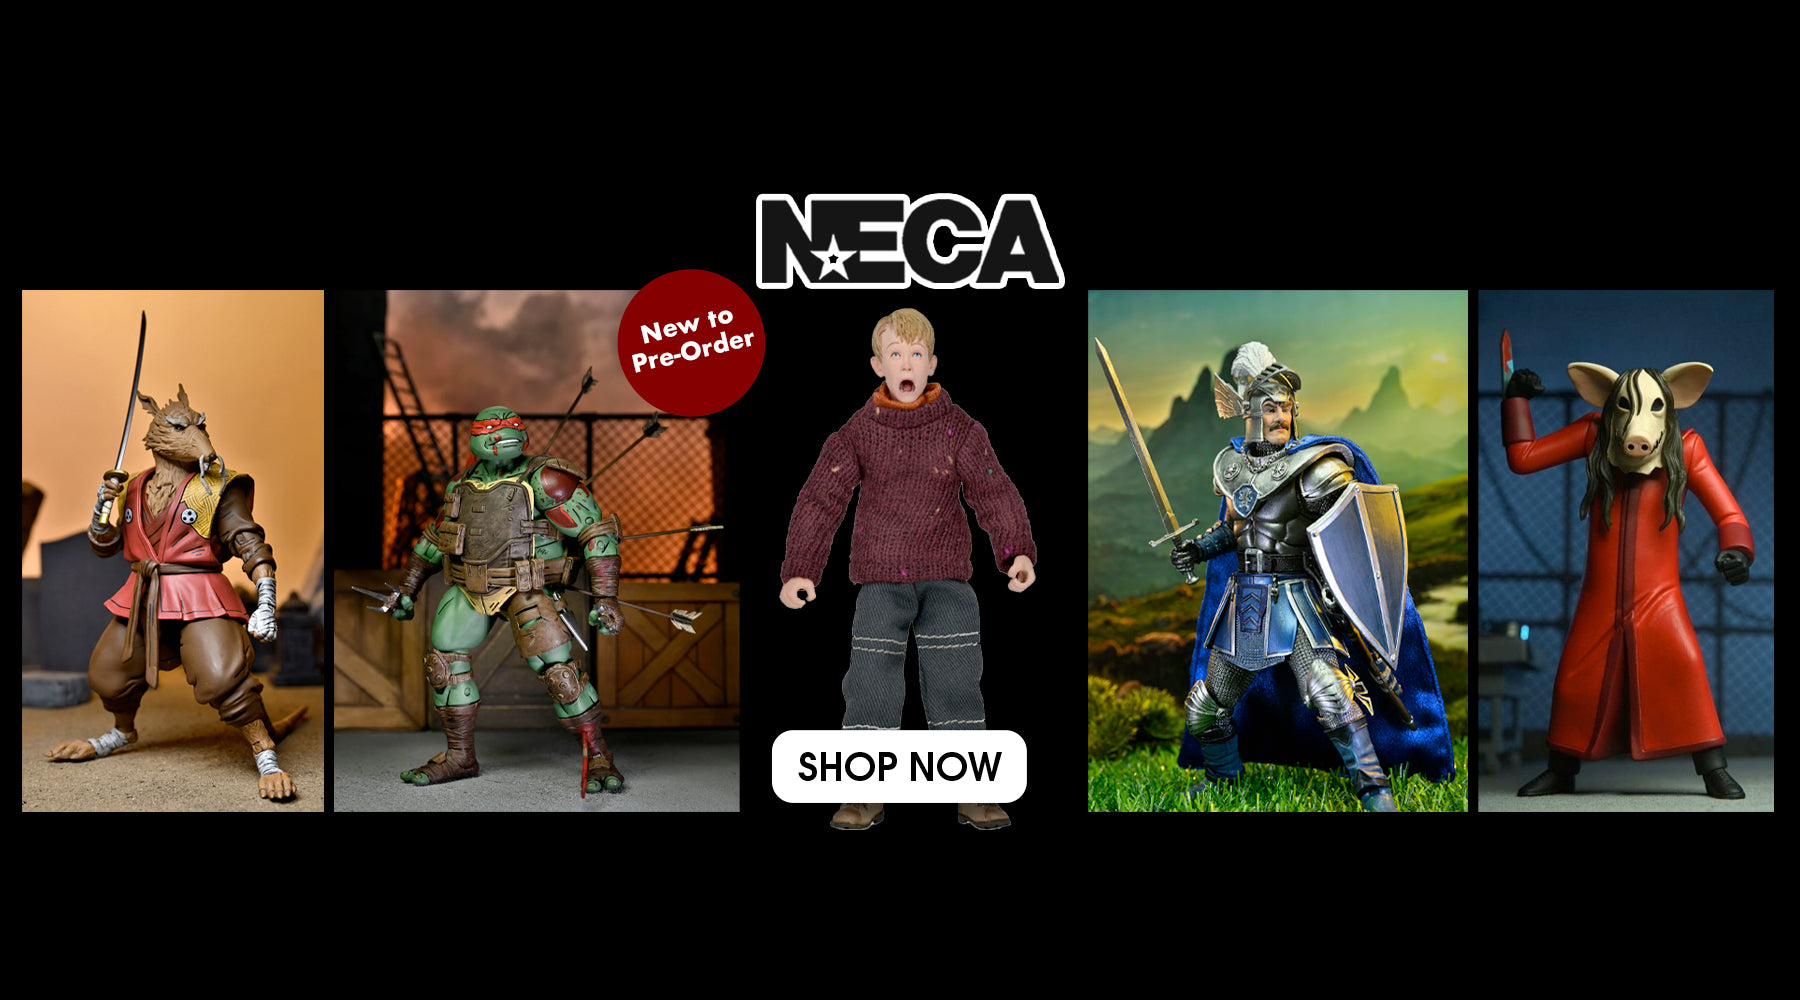 New NECA action figures are available for pre-order! With new additions to TMNT The Last Ronin, including First to Fall Raphael and Splinter, Jigsaw Killer Toony Terrors, D&D 50th Anniversary Strongheart, Home Alone and more! Order online now at Costume Super Centre Australia